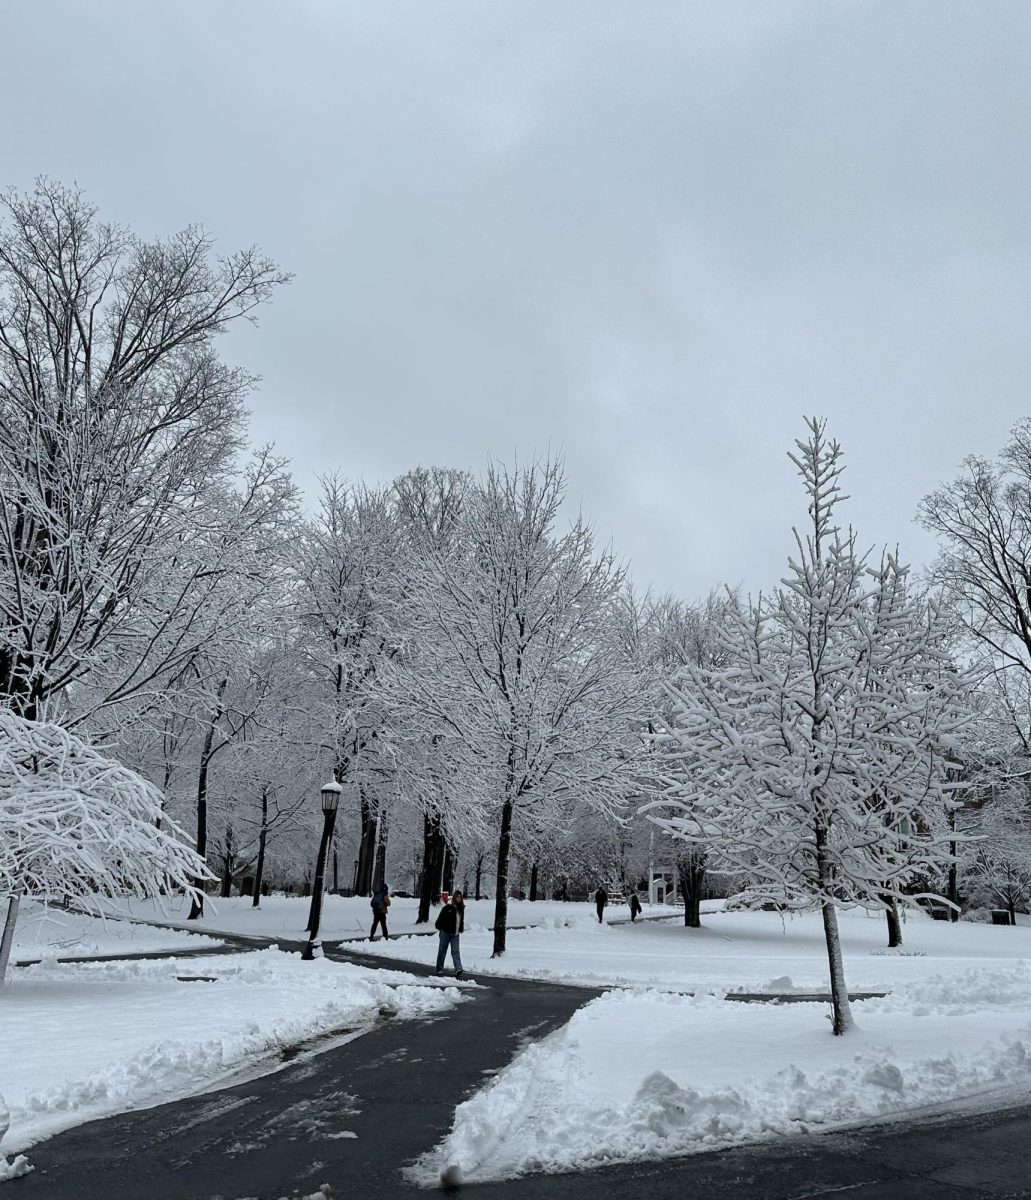 Snow covered Bates after a storm on Dec. 3 and 4.